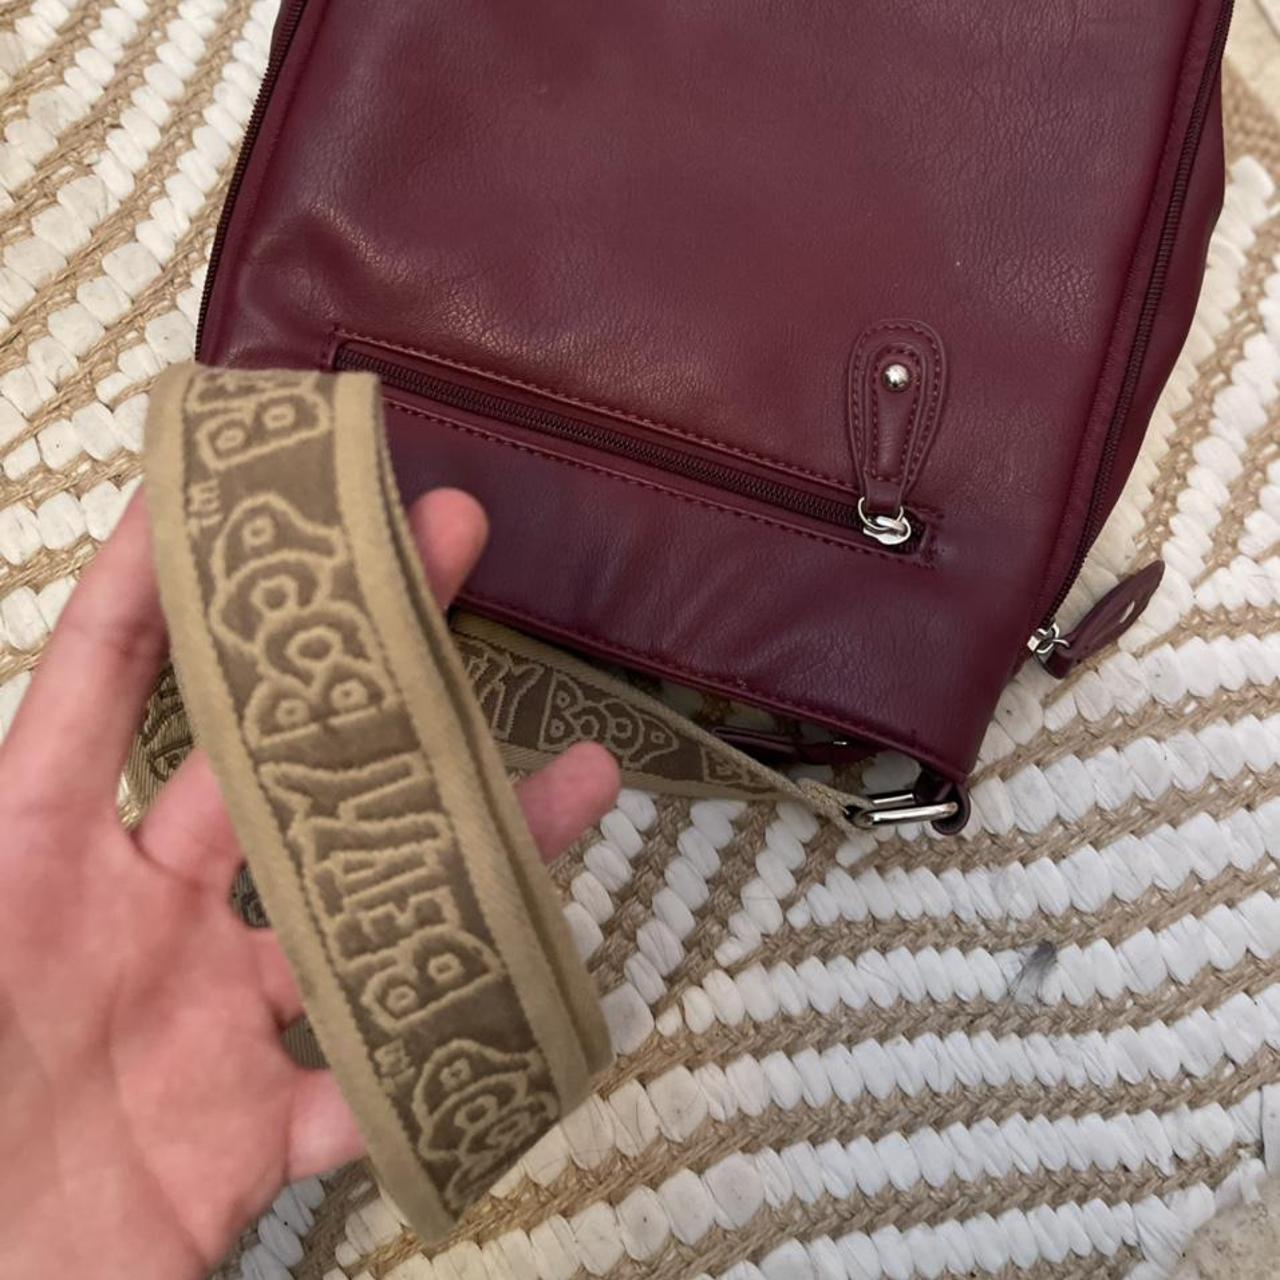 Women's Burgundy and Gold Bag (3)